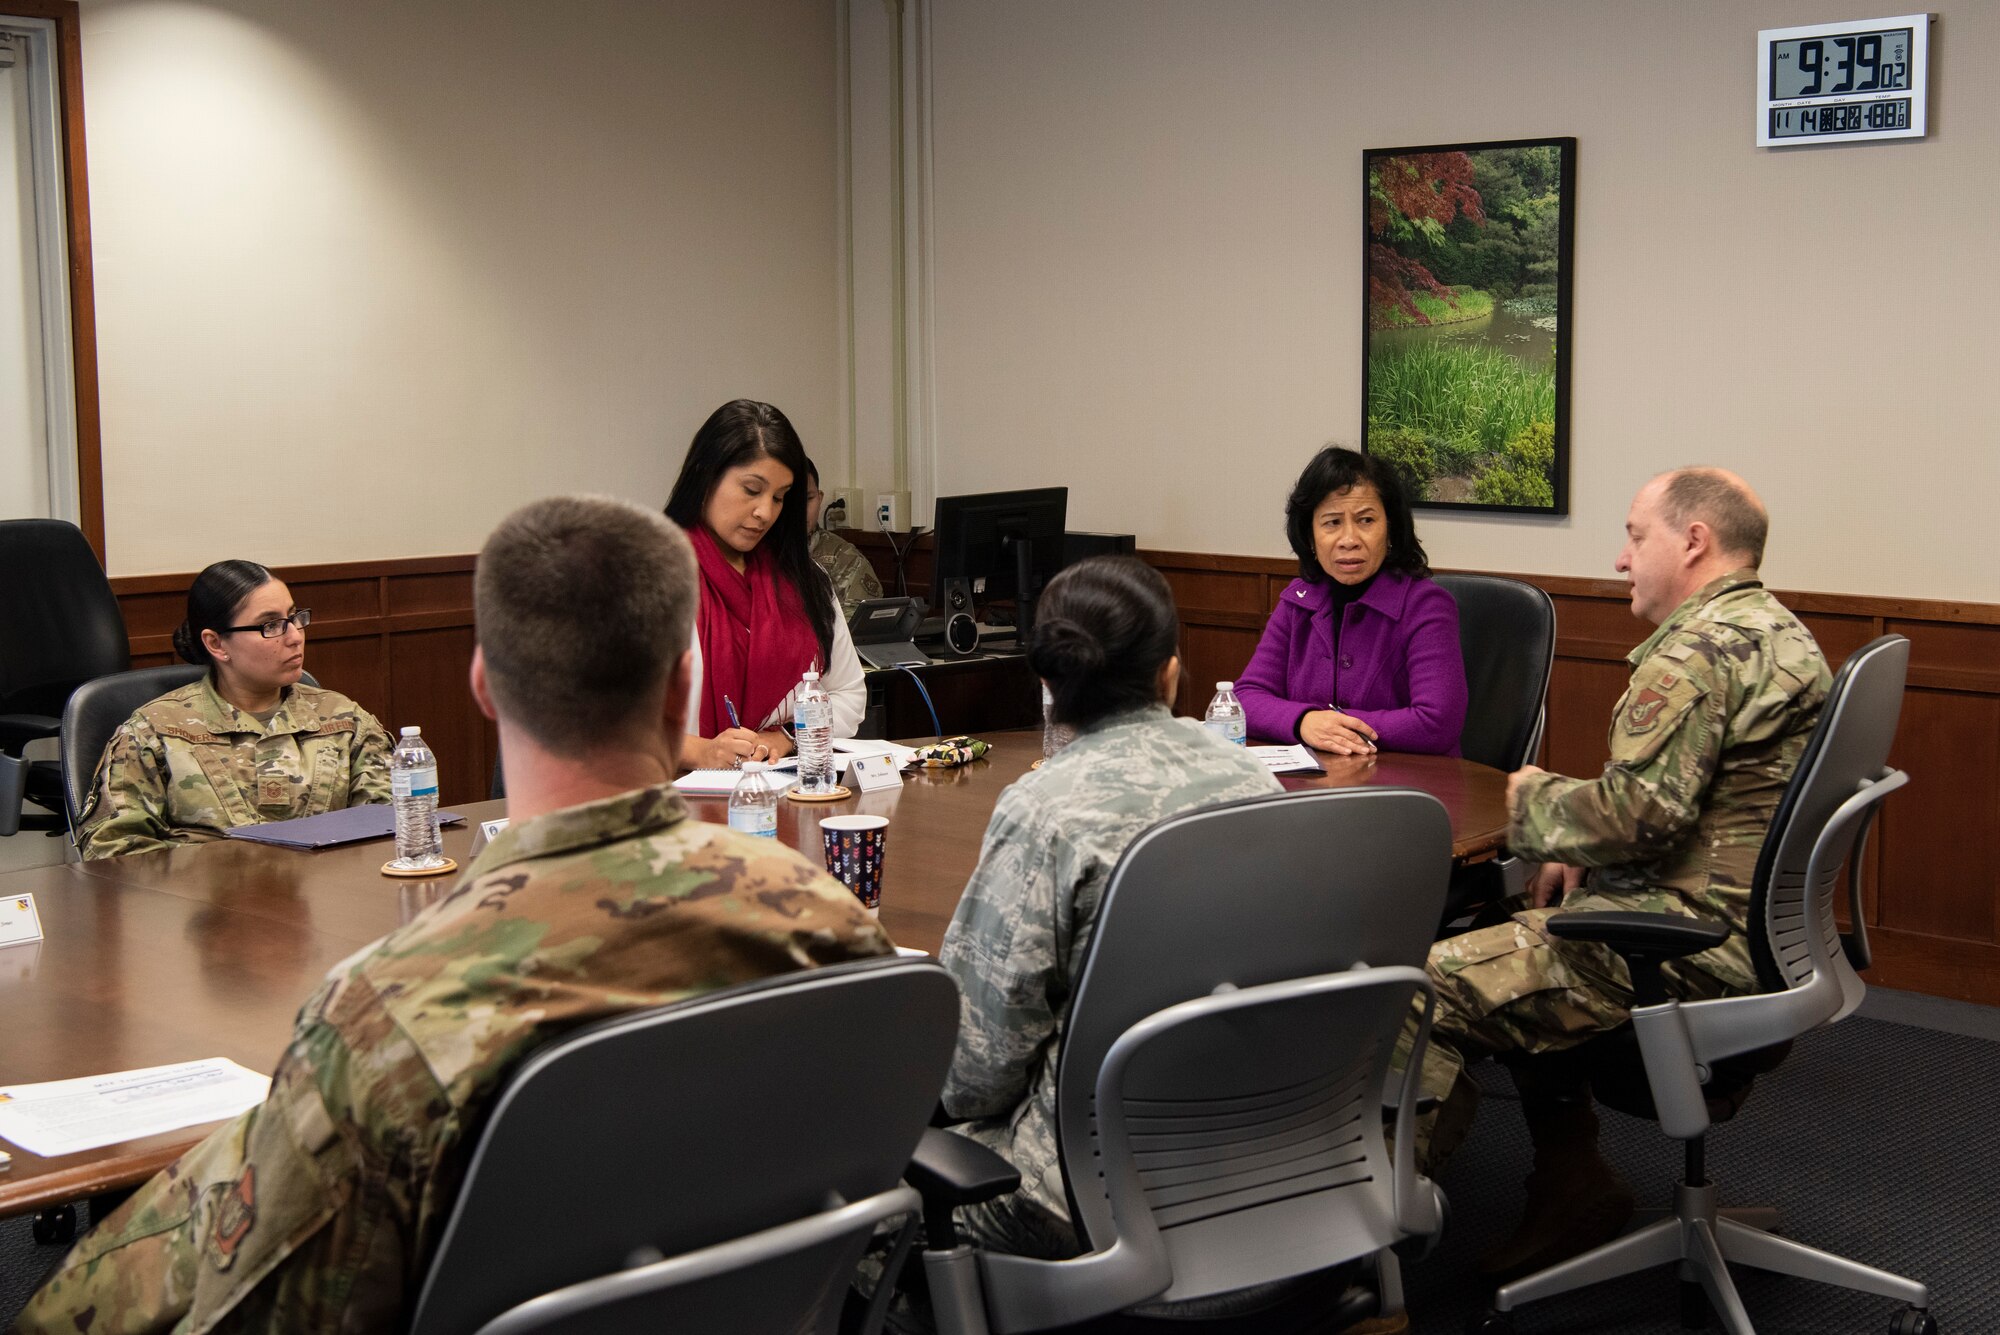 Sharene Brown, spouse of Gen. CQ Brown, Jr., Pacific Air Forces commander, and Stephanie Johnson, spouse of Chief Master Sgt. Anthony Johnson, PACAF command chief, meet with 374th Medical group members on Nov. 14, 2019, at Yokota Air Base, Japan.